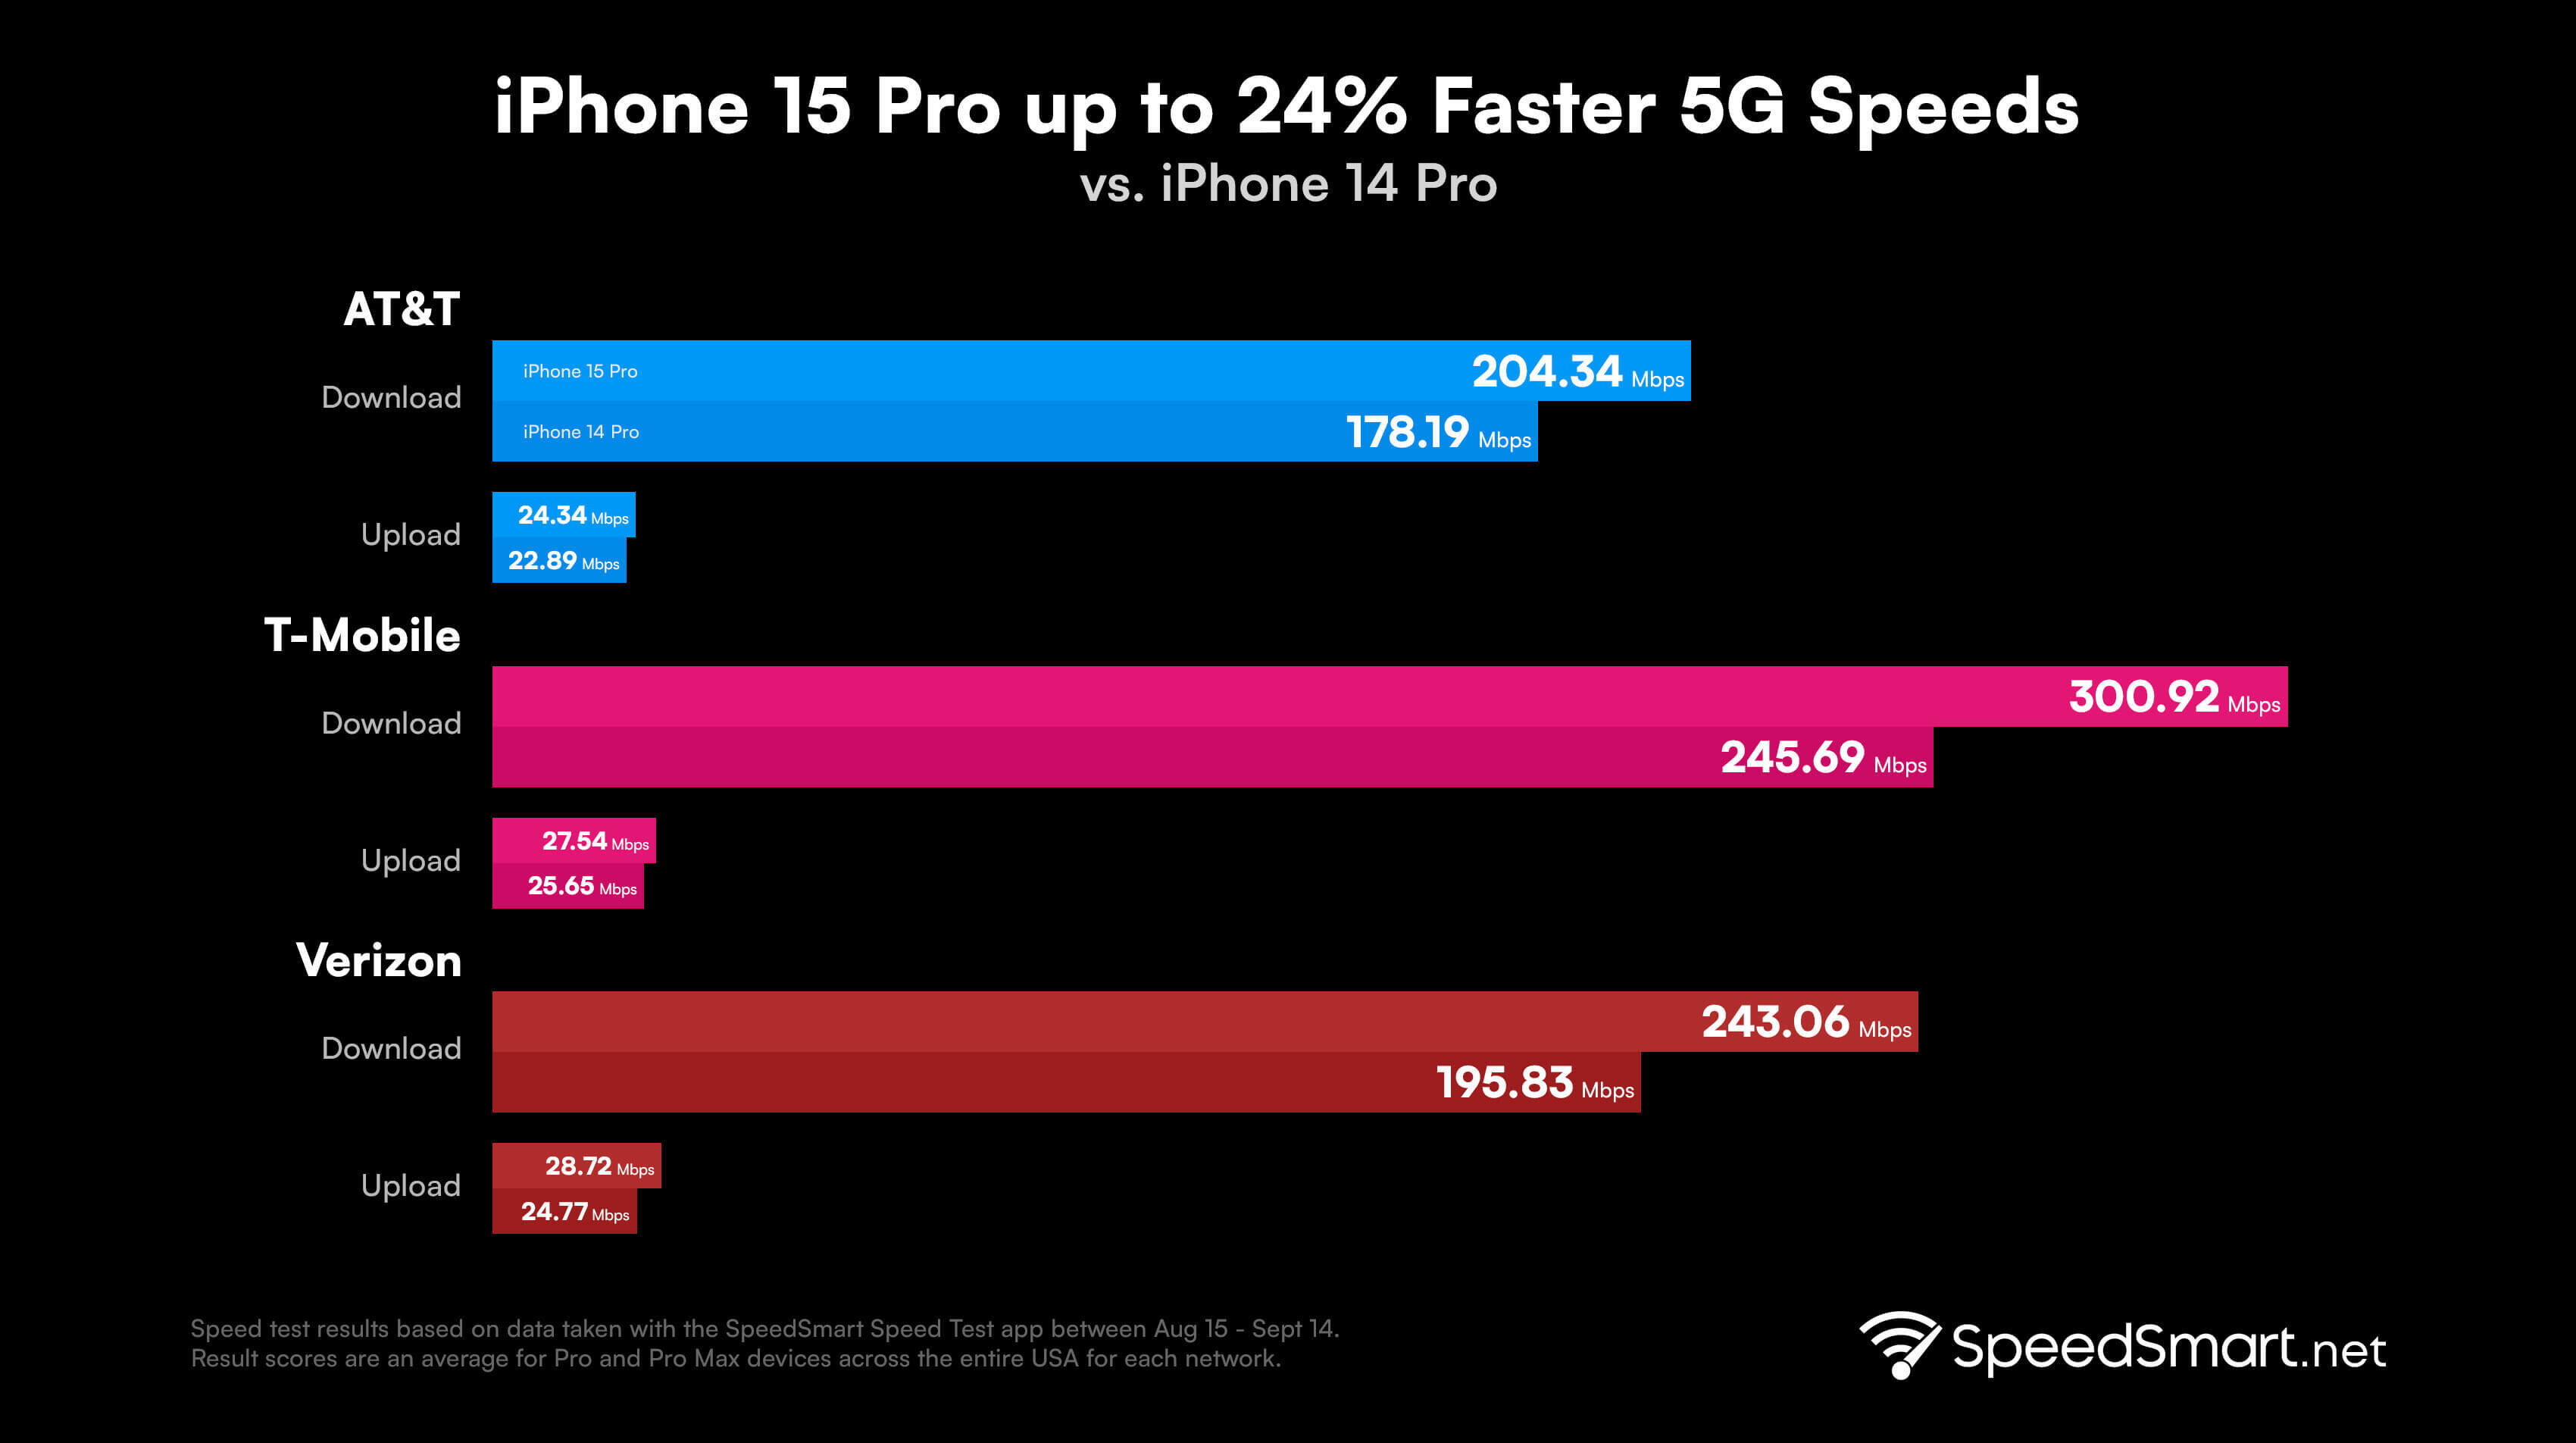 In the U.S., tests show up to 24% faster 5G download data speeds for the new iPhone 15 Pro series - You should expect solid increases in 5G data speeds with the iPhone 15 Pro and iPhone 15 Pro Max